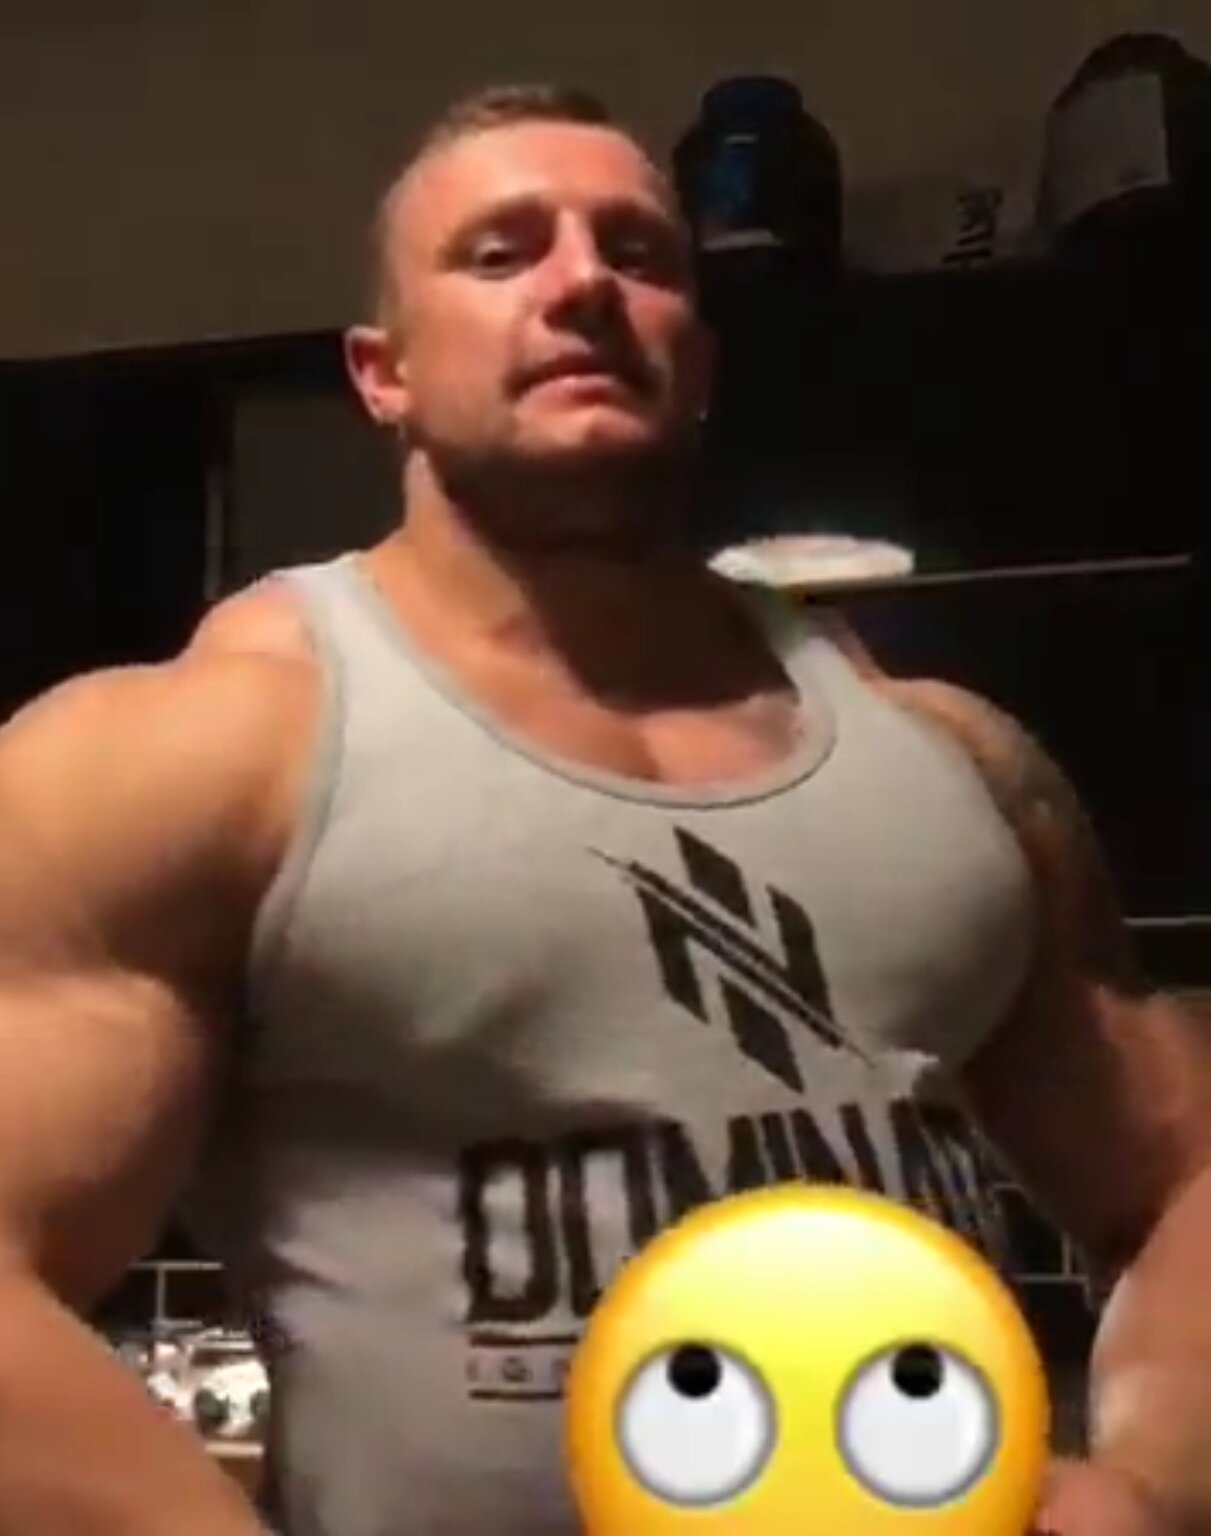 Big Muscle - Huge man showing off his muscles - ThisVid.com